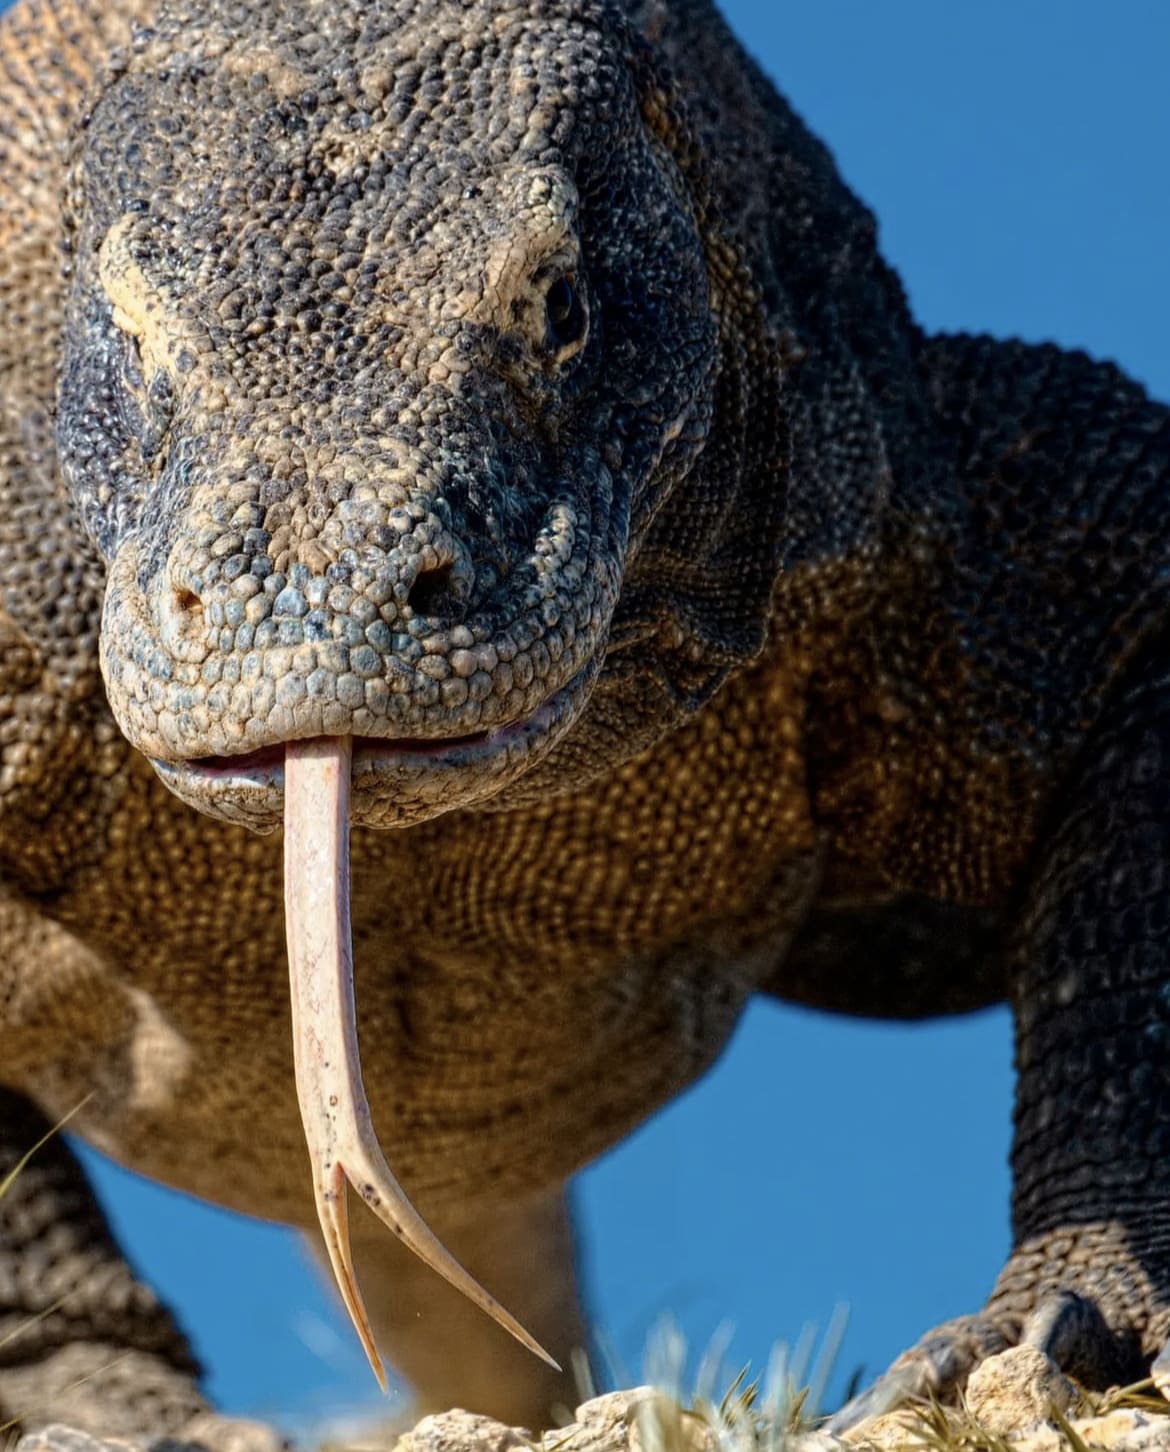 The world's largest lizard showing off itsForked tongue